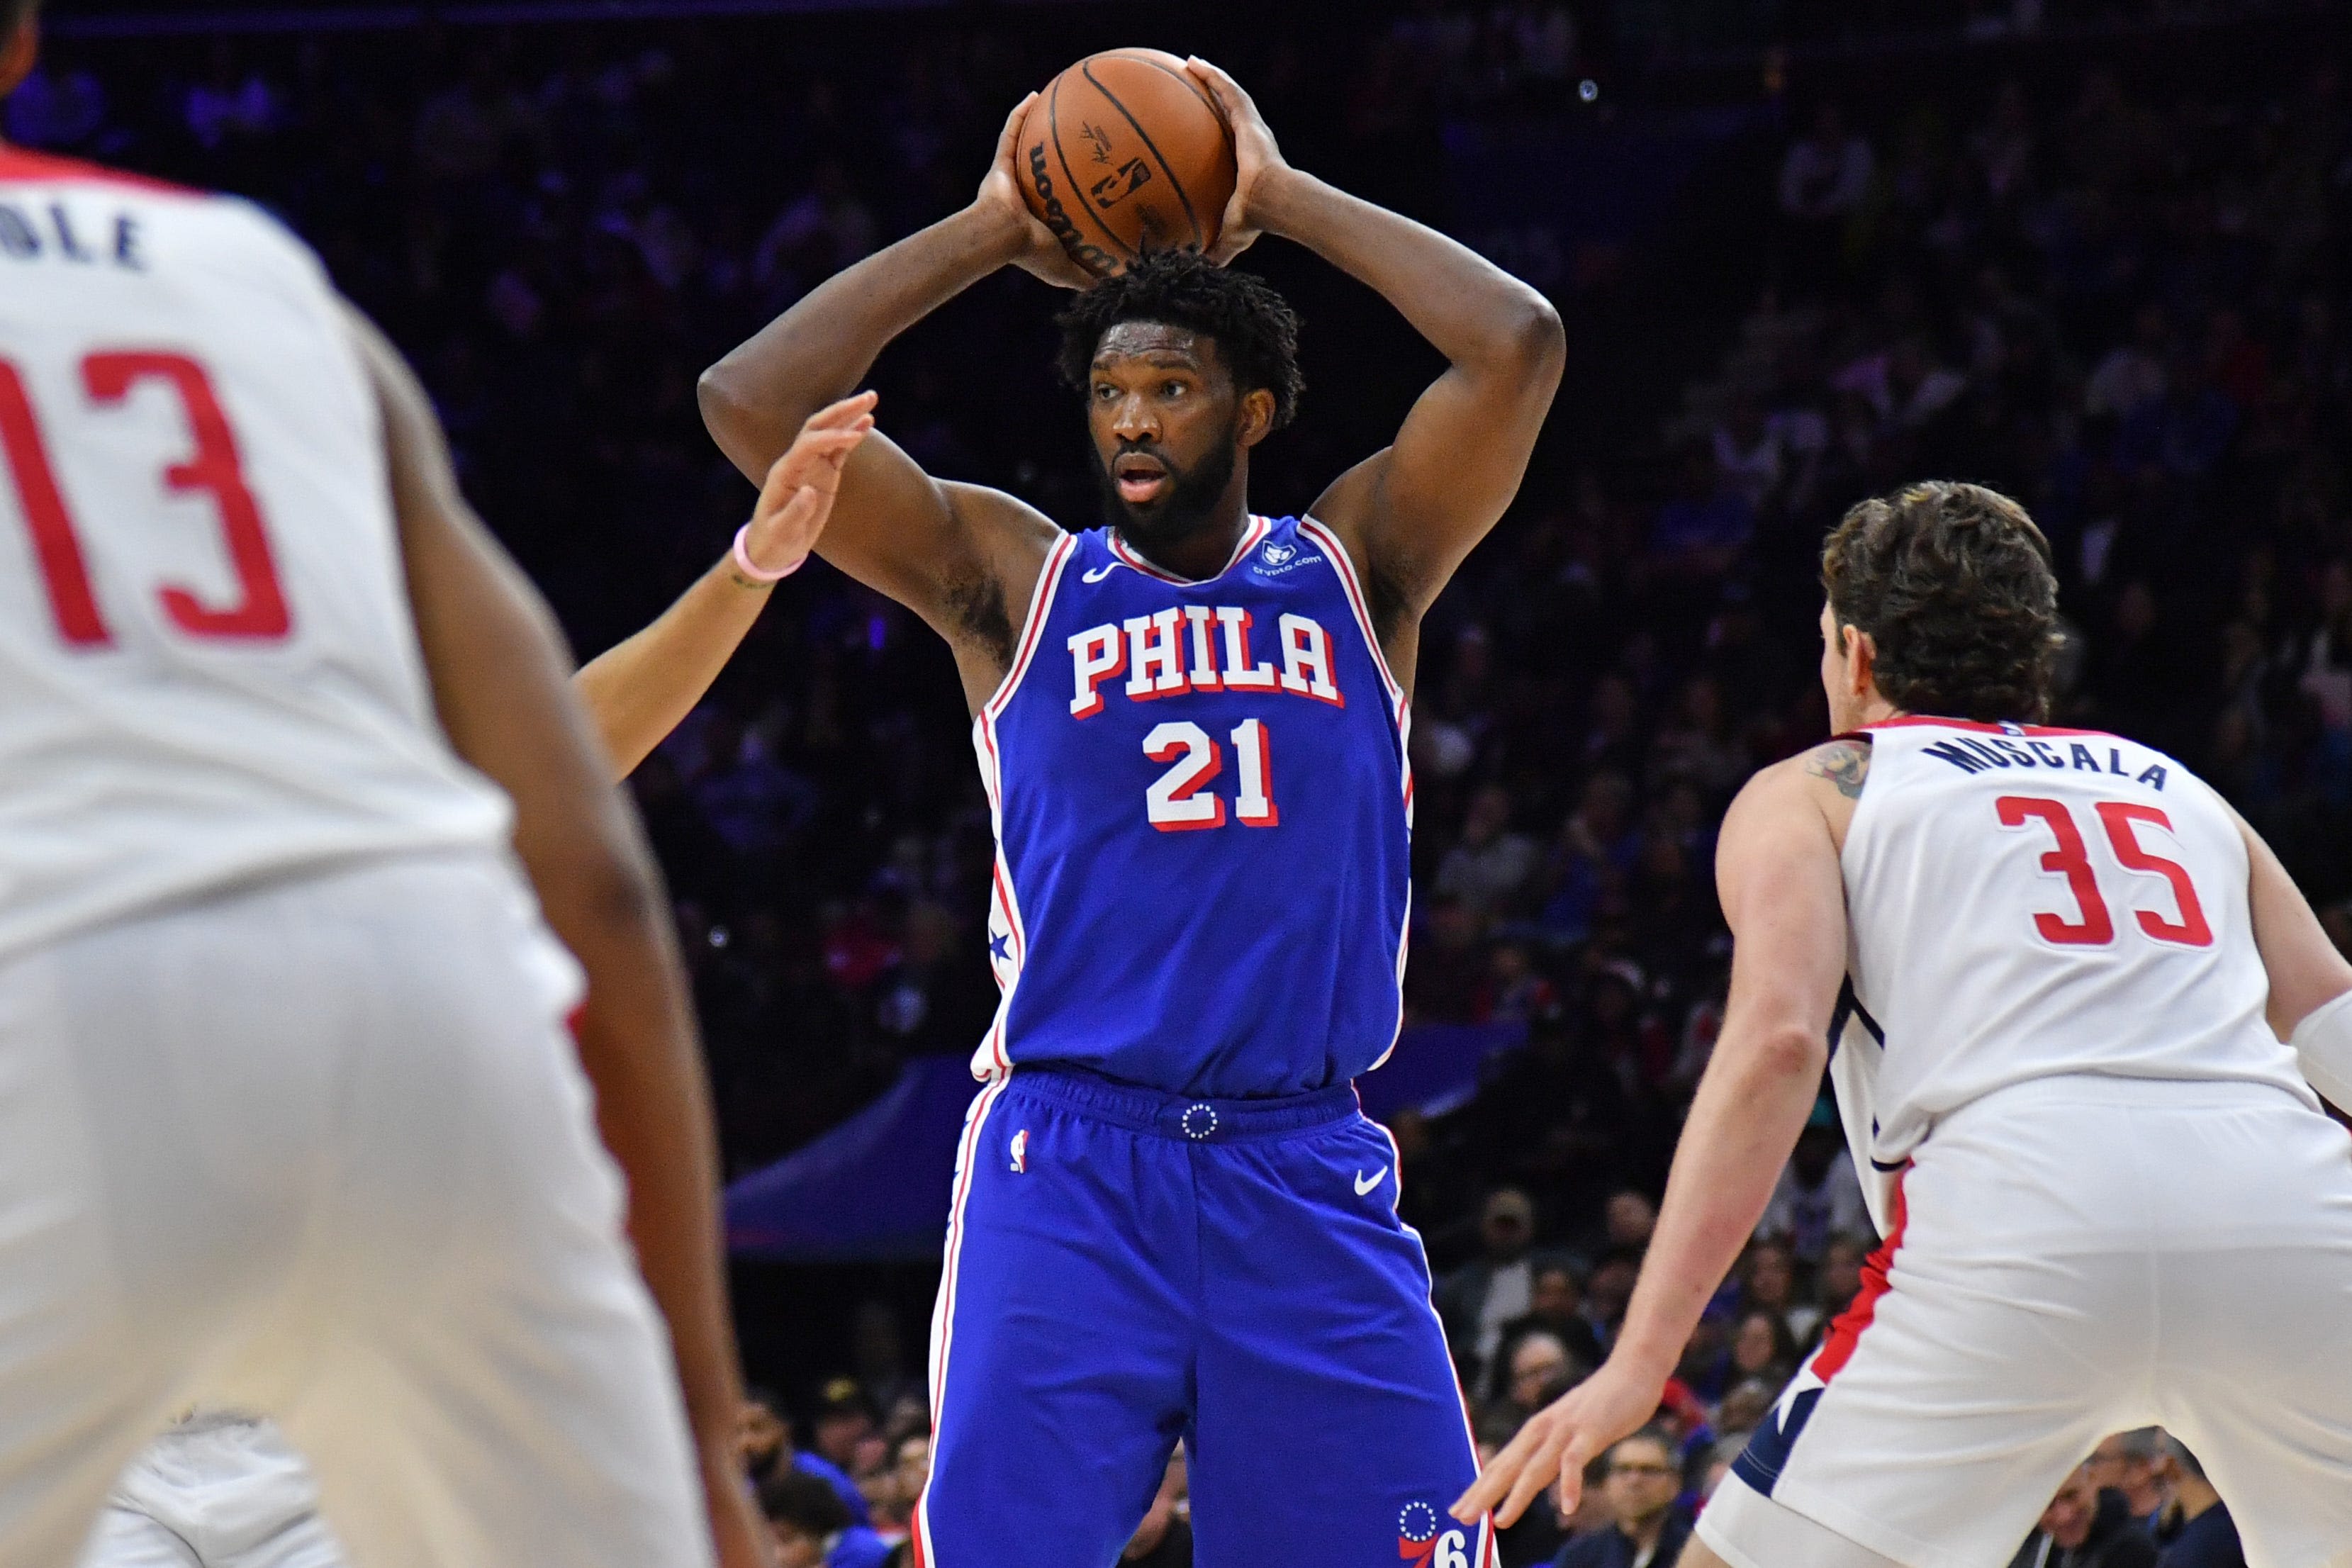 Colin Cowherd slams Joel Embiid for not leading Sixers in the playoffs